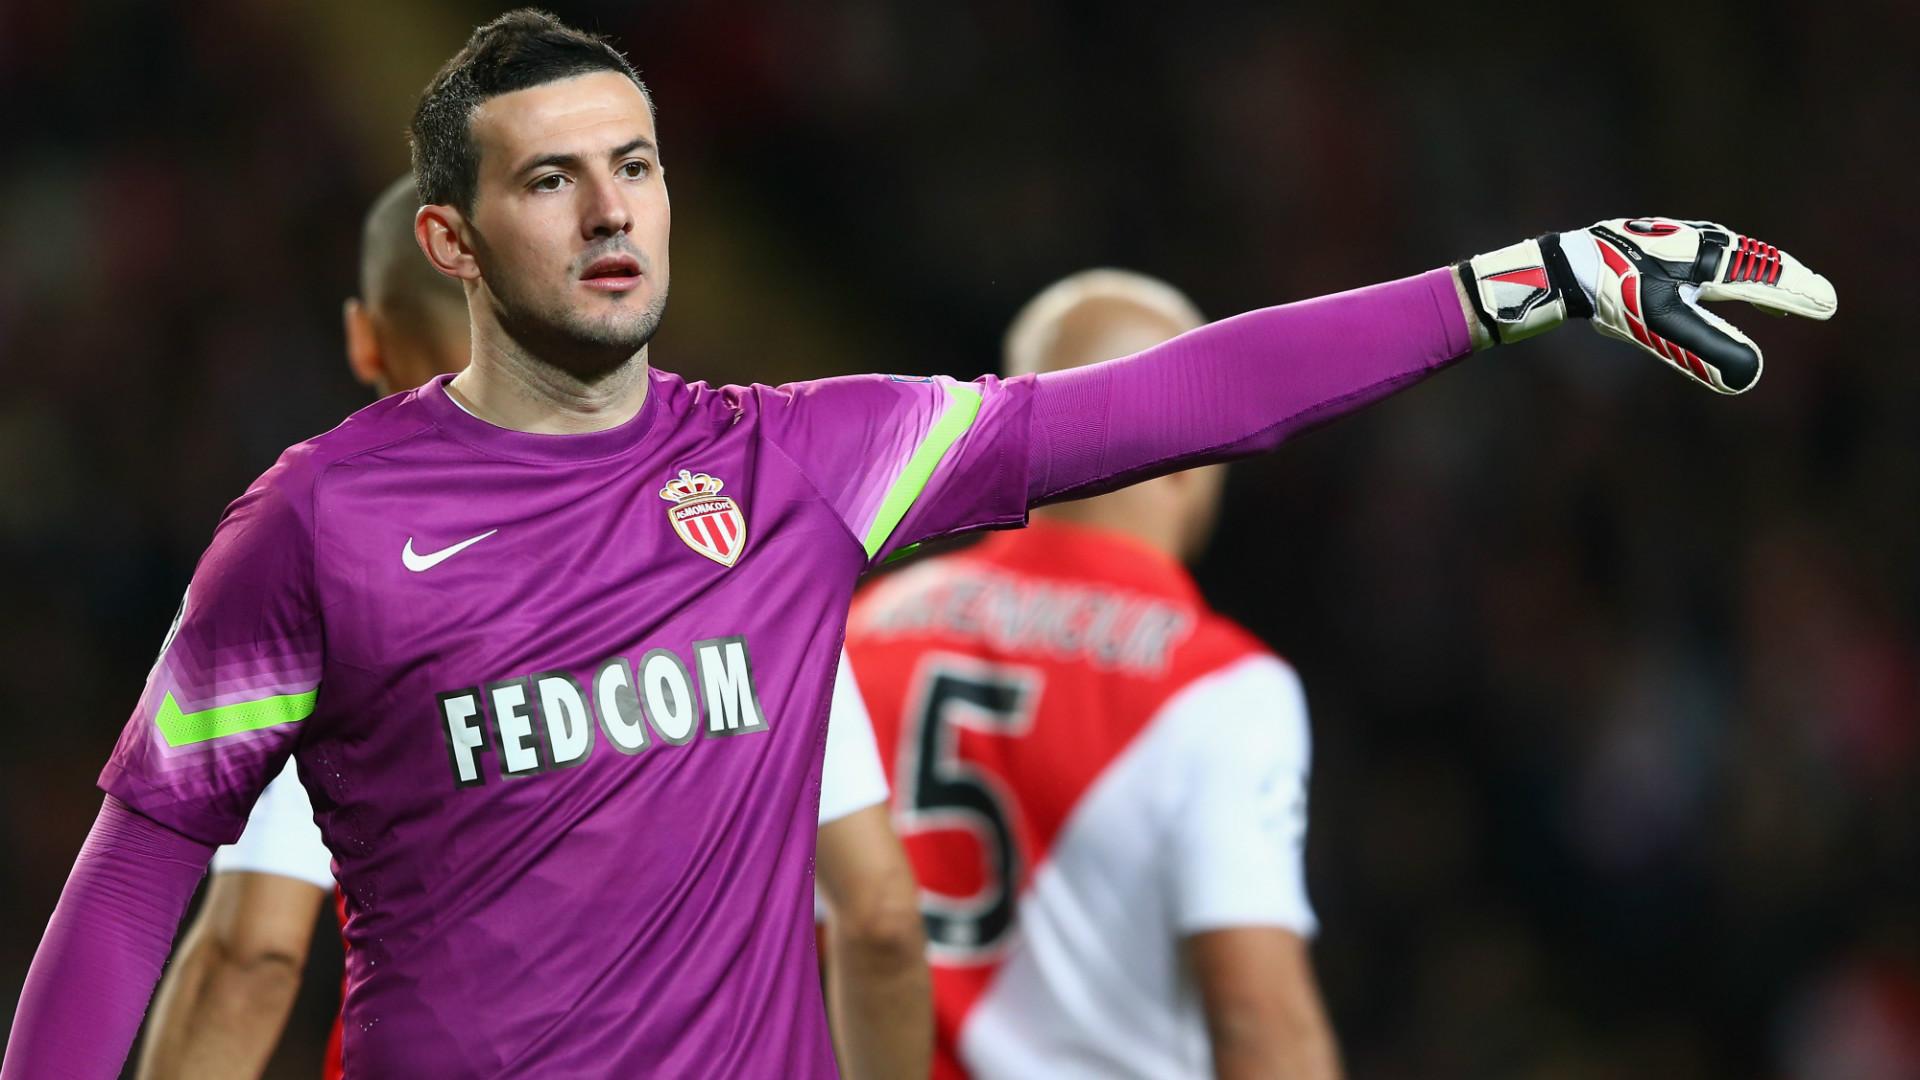 VIDEO: Subasic mistake gifts Bordeaux a late goal